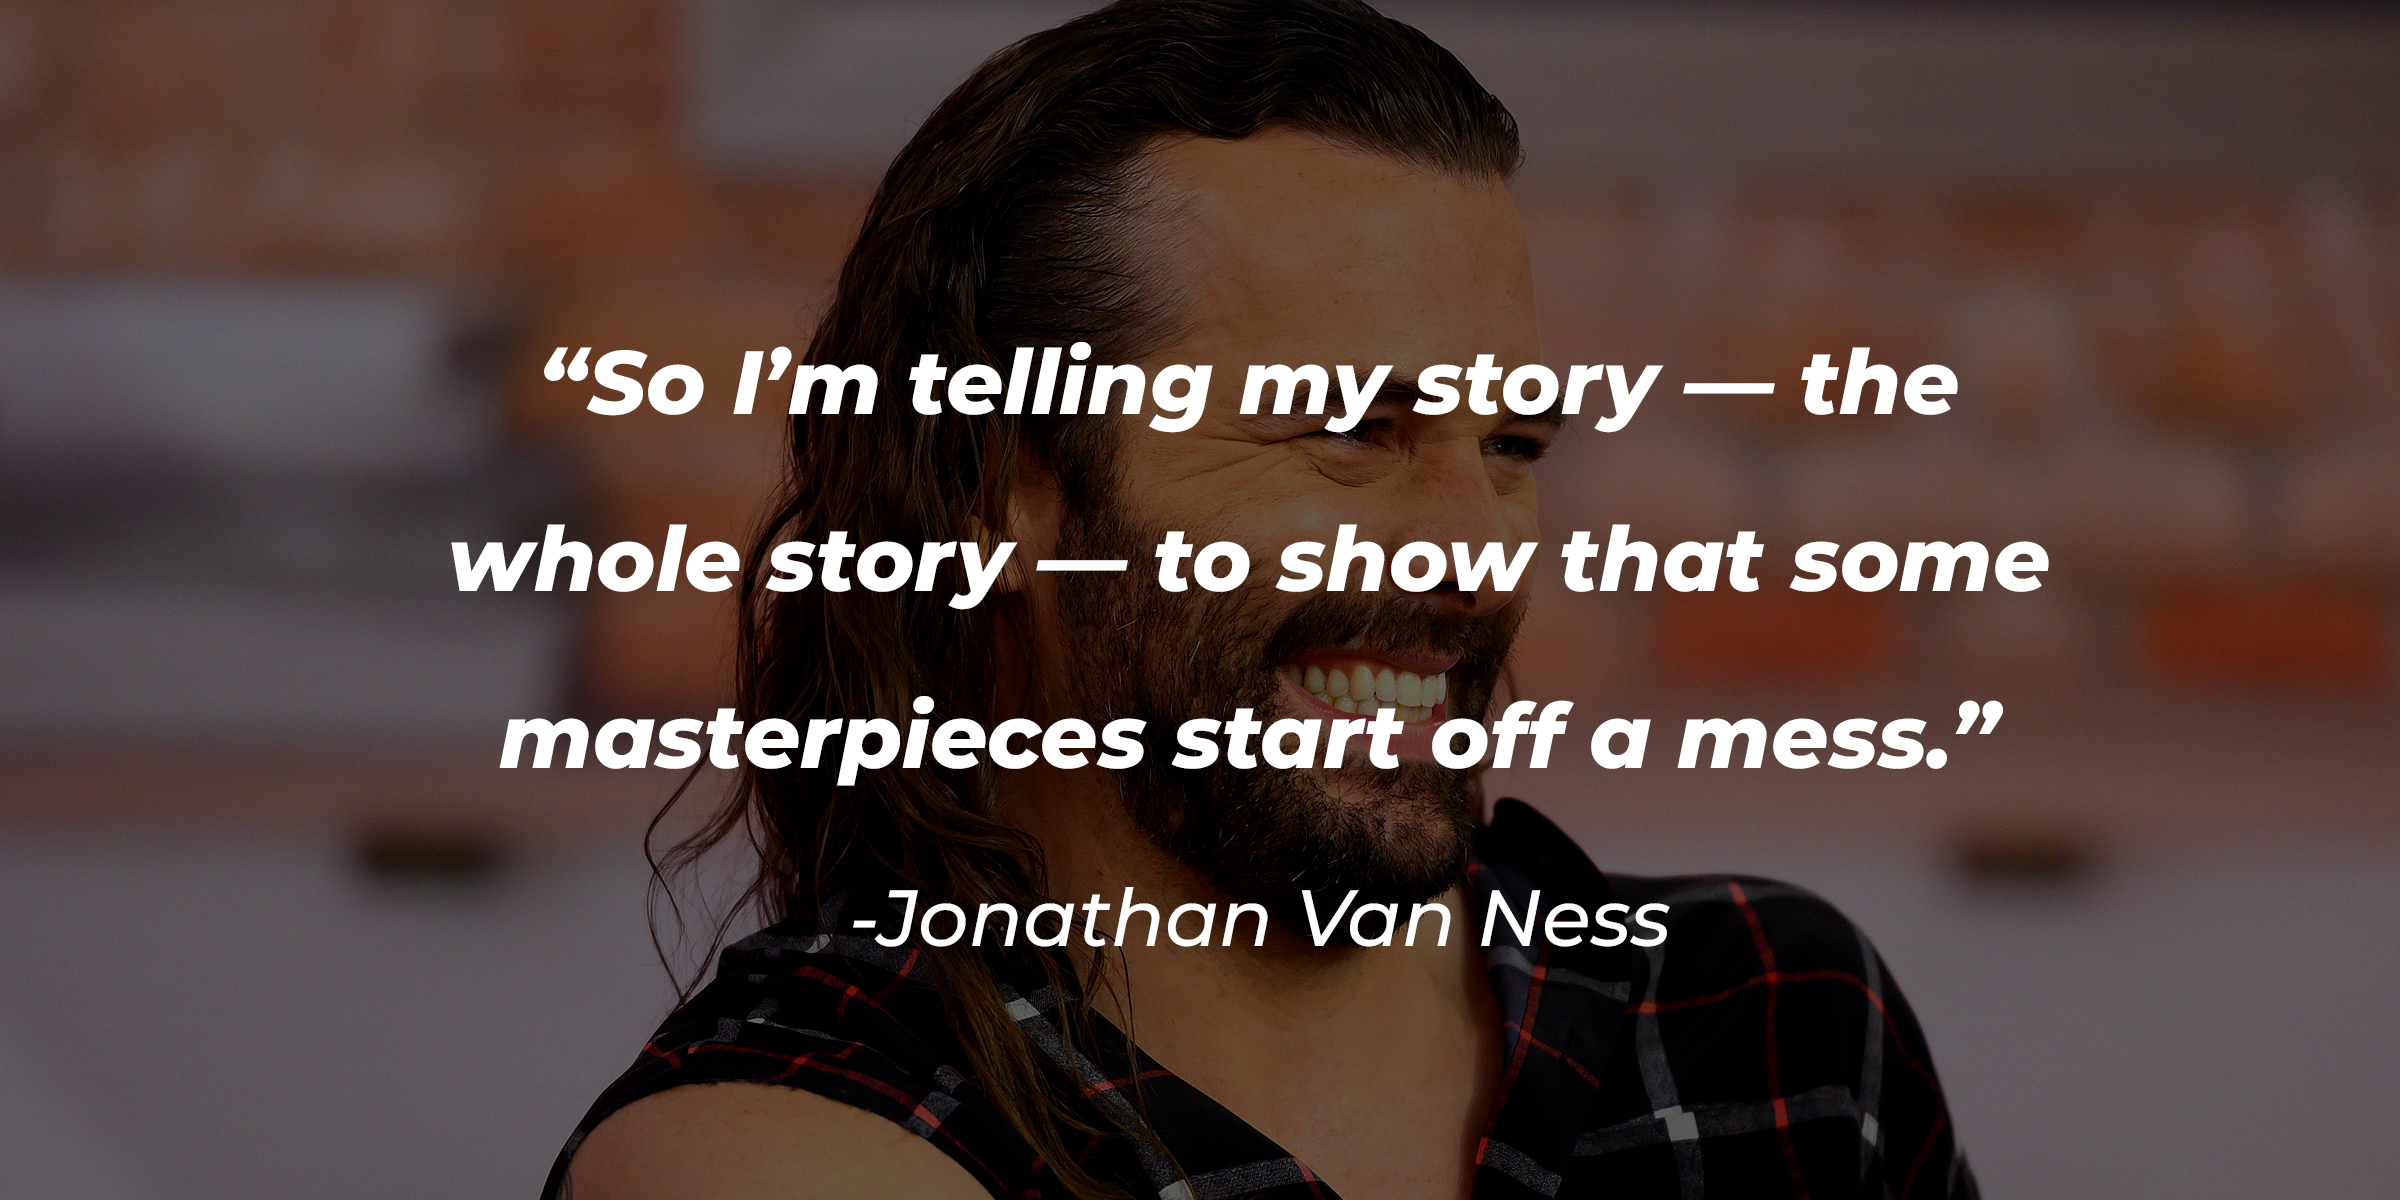 Jonathan Van Ness with his quote: “So I’m telling my story—the whole story—to show that some masterpieces start off a mess.” | Source: Getty Images